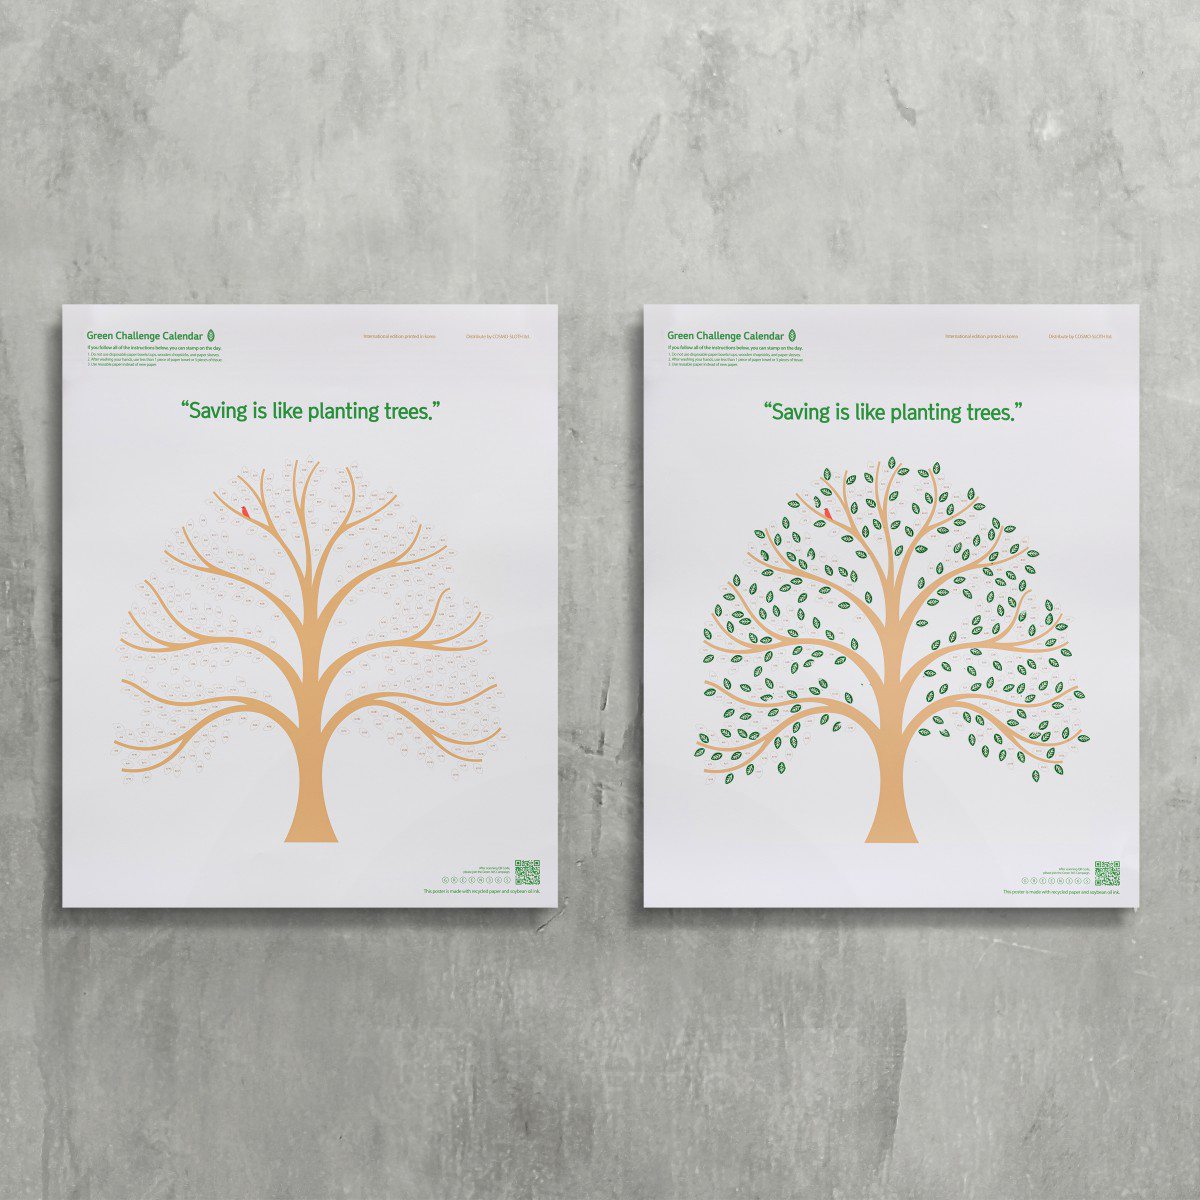 Green Challenge 365 Educational Calendar by SUNG HO NAM